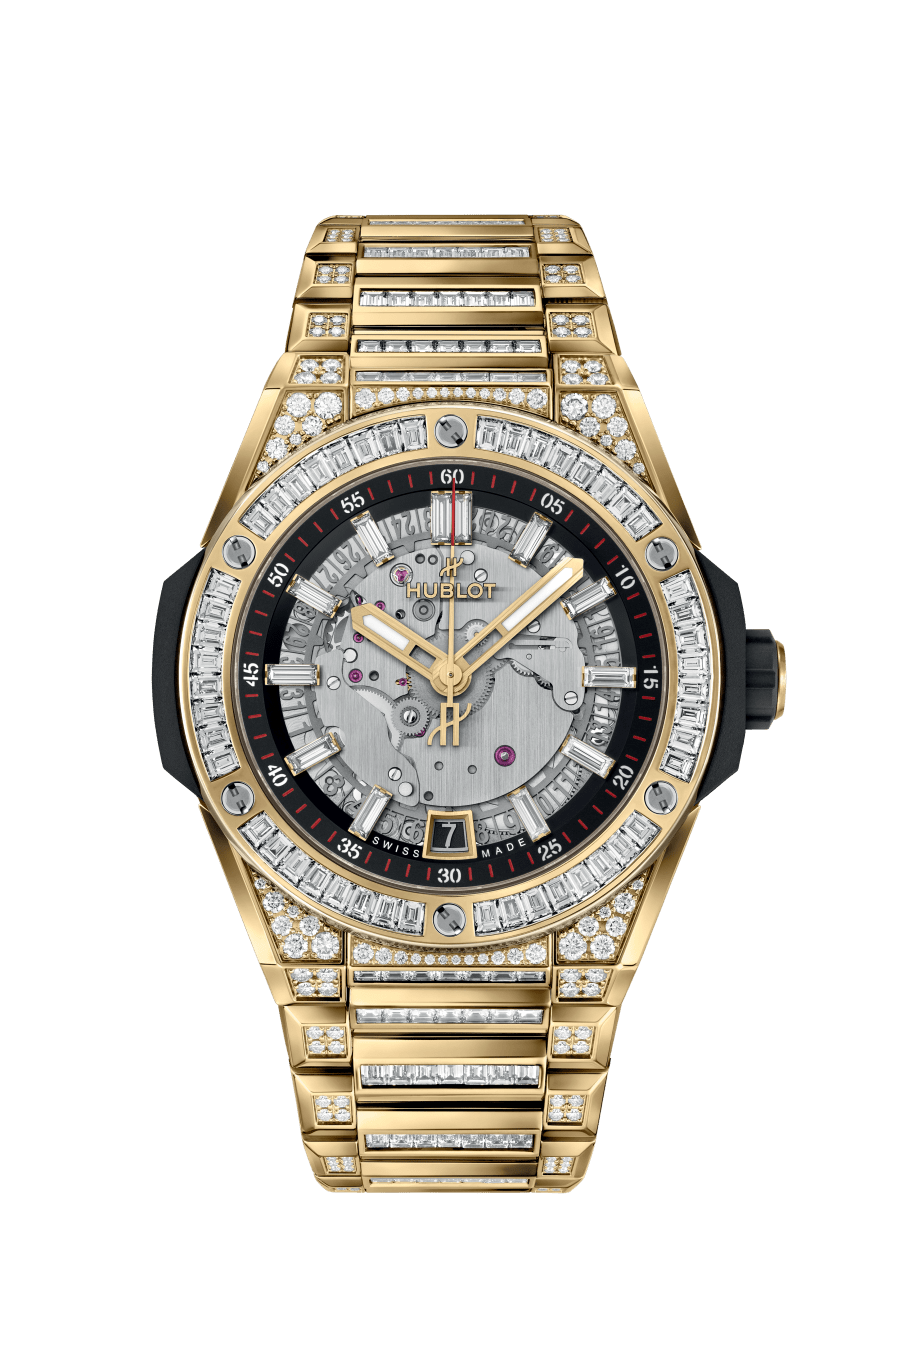 HUBLOT BIG BANG INTEGRATED TIME ONLY YELLOW GOLD JEWELLERY